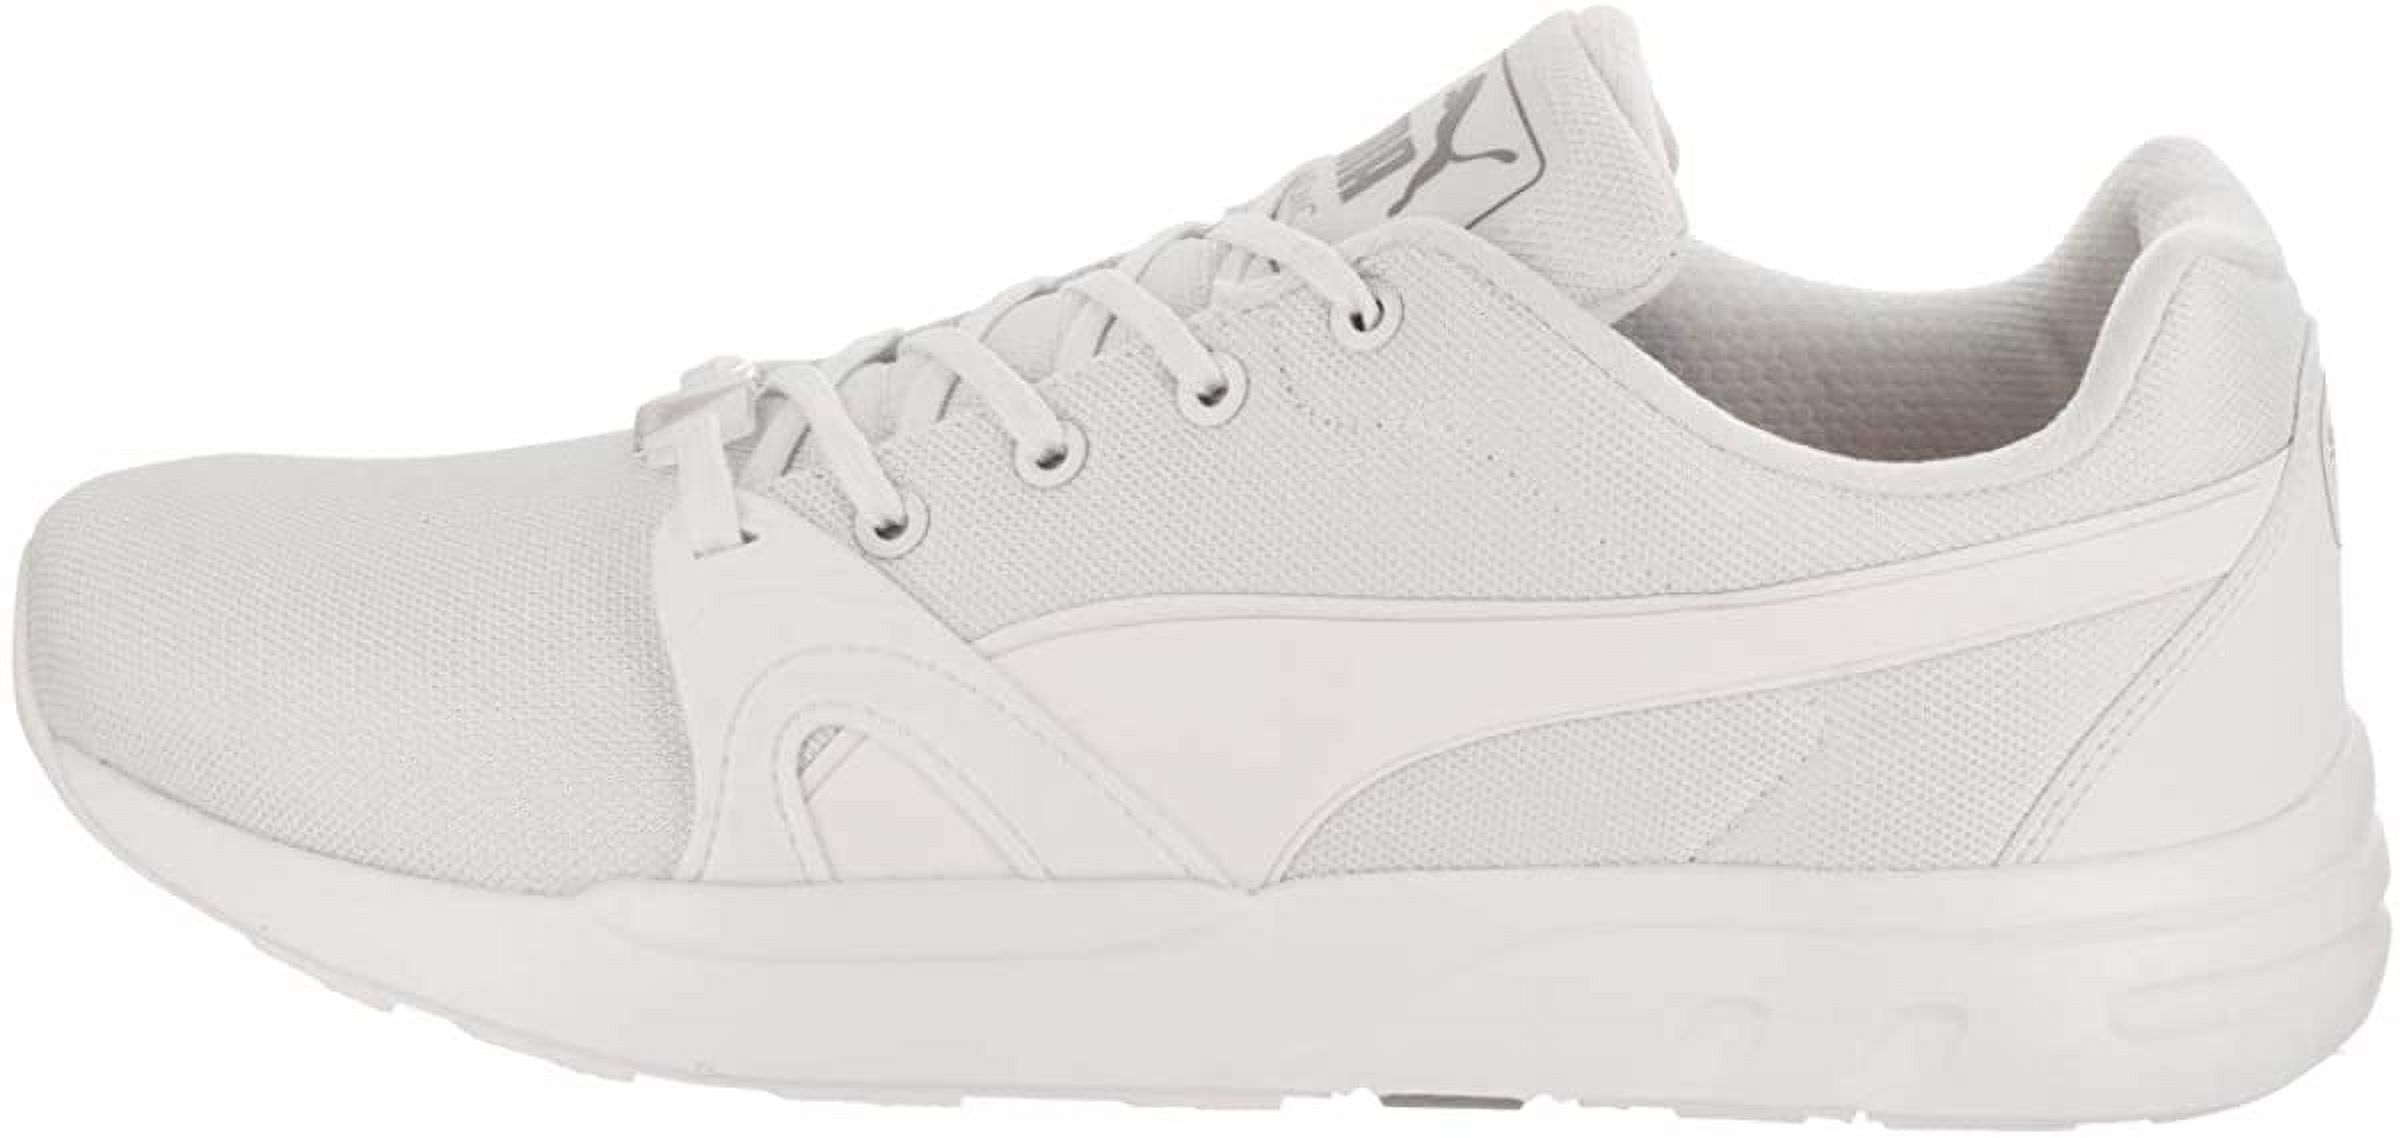 Puma Men's XT S Running Casual Walking Sneakers Shoes, 2 Colors - image 2 of 5